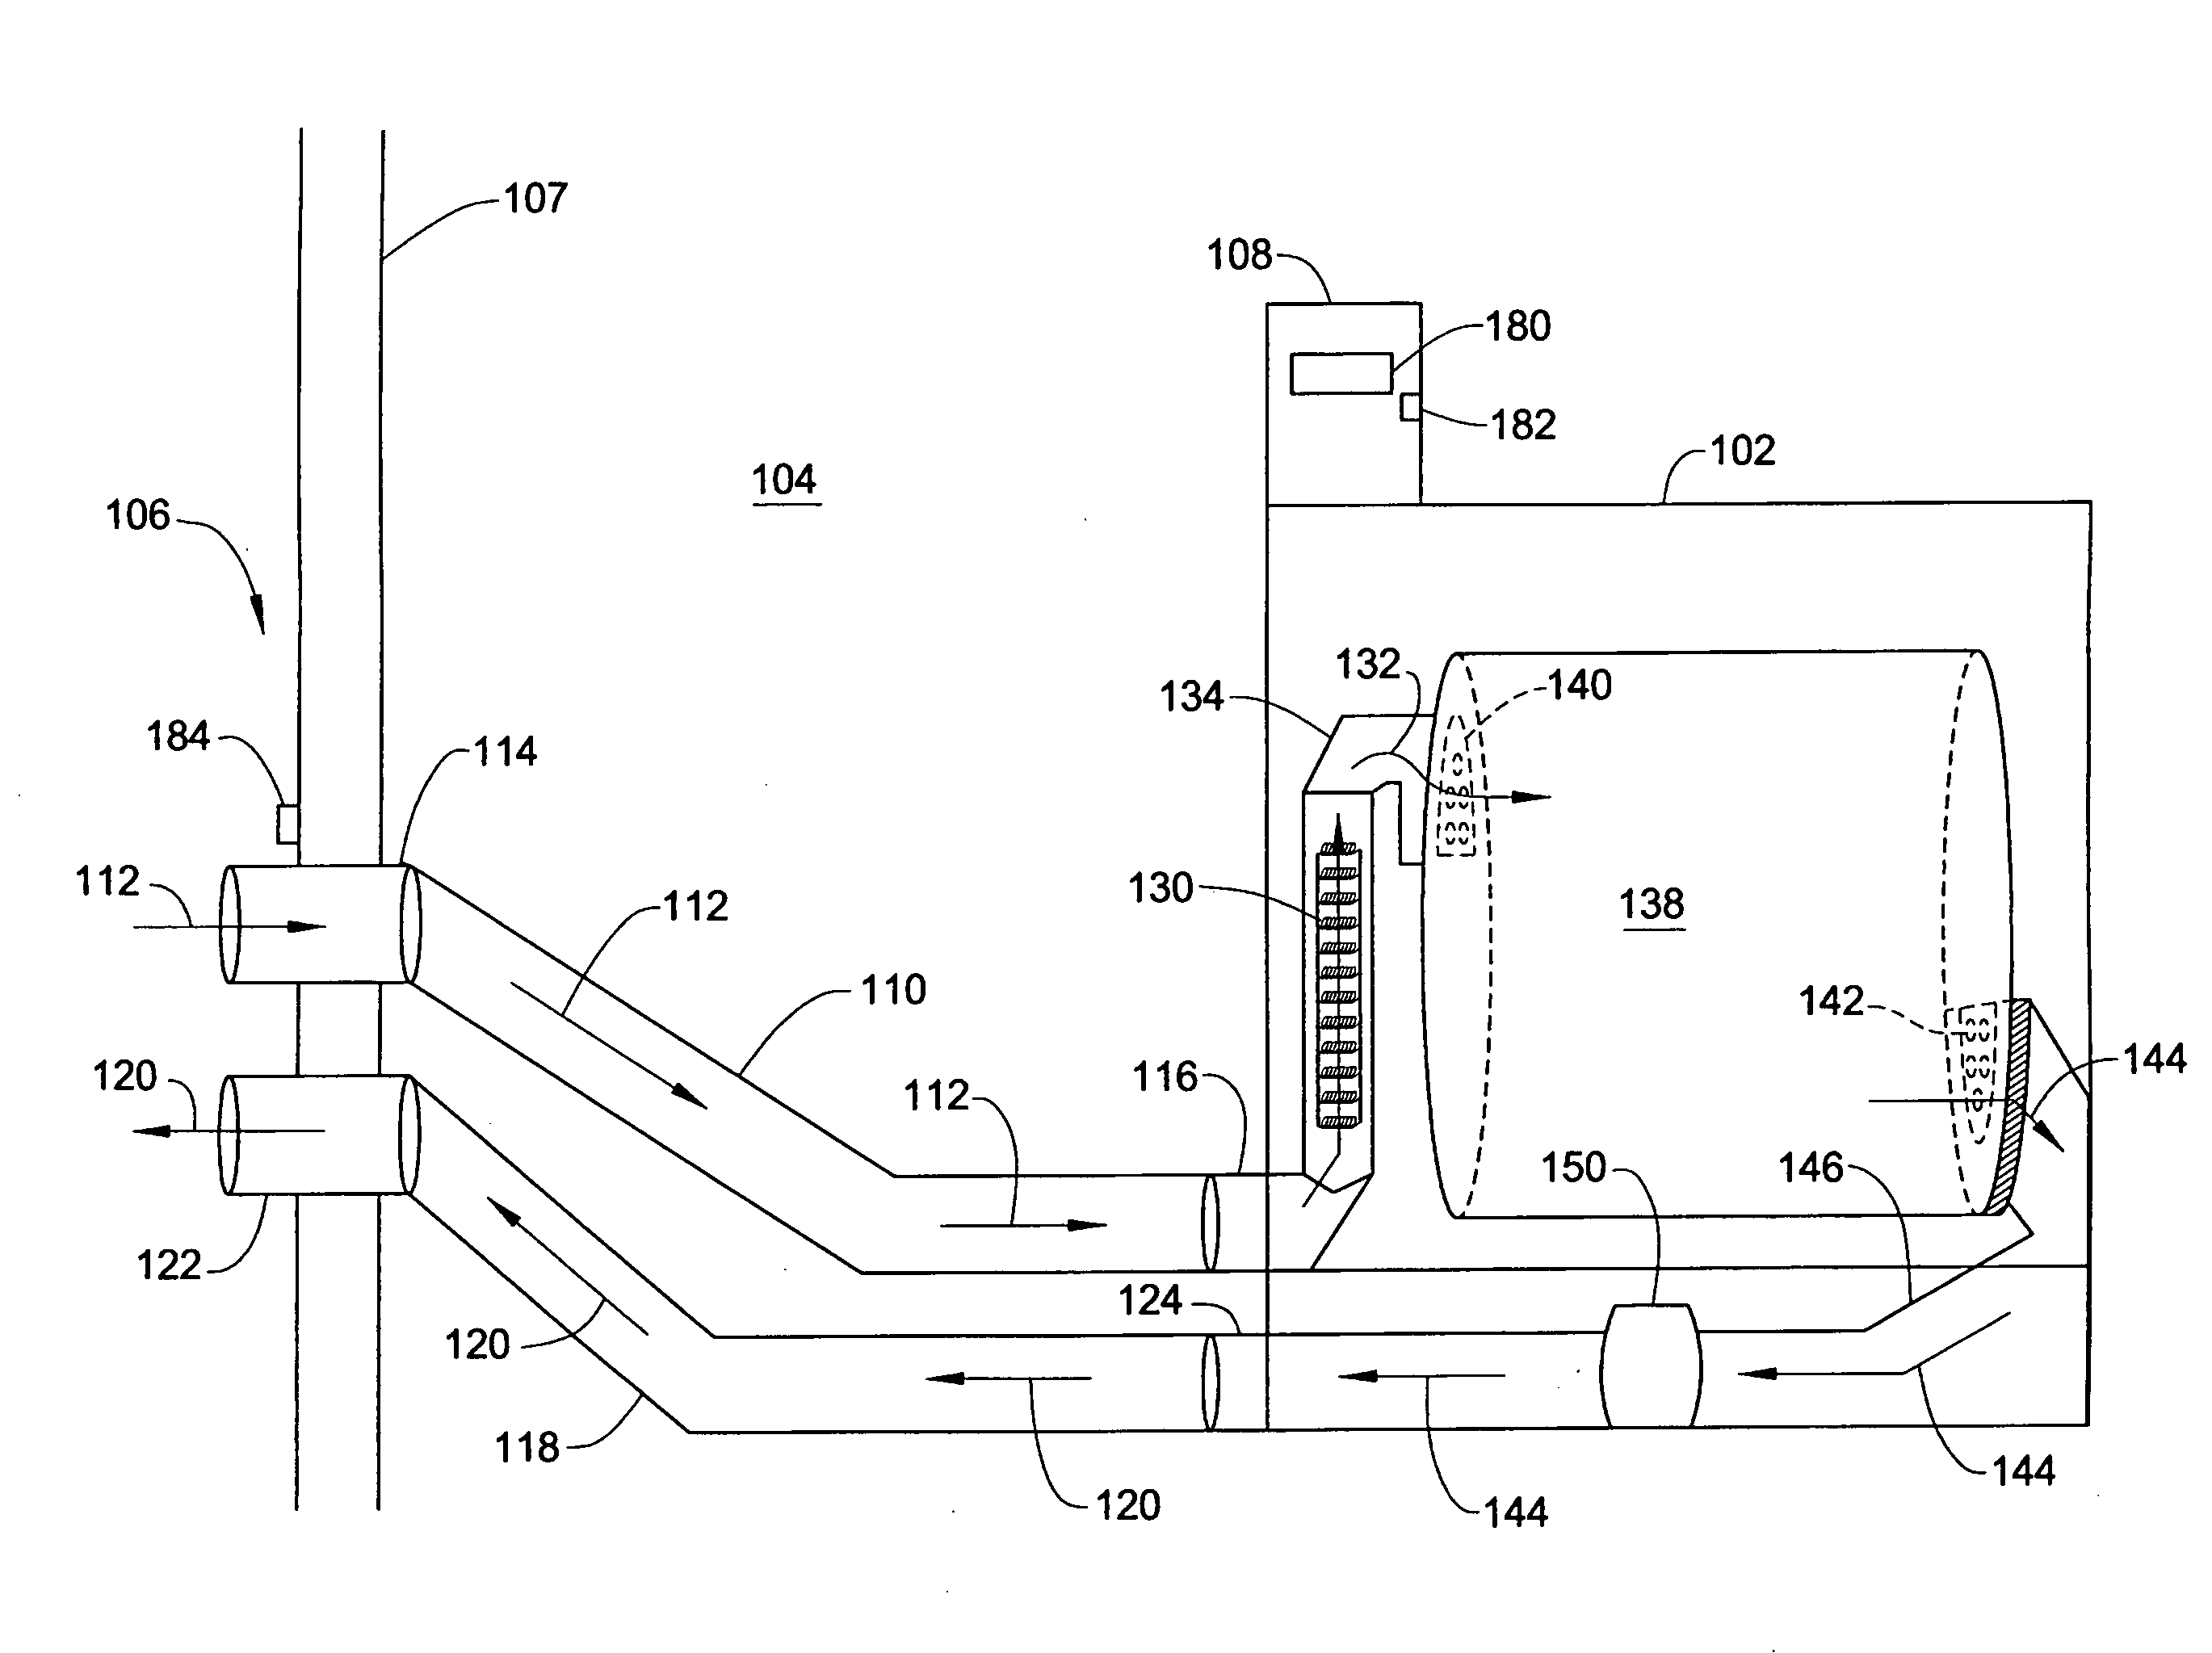 Dryer and adapter having ducting system